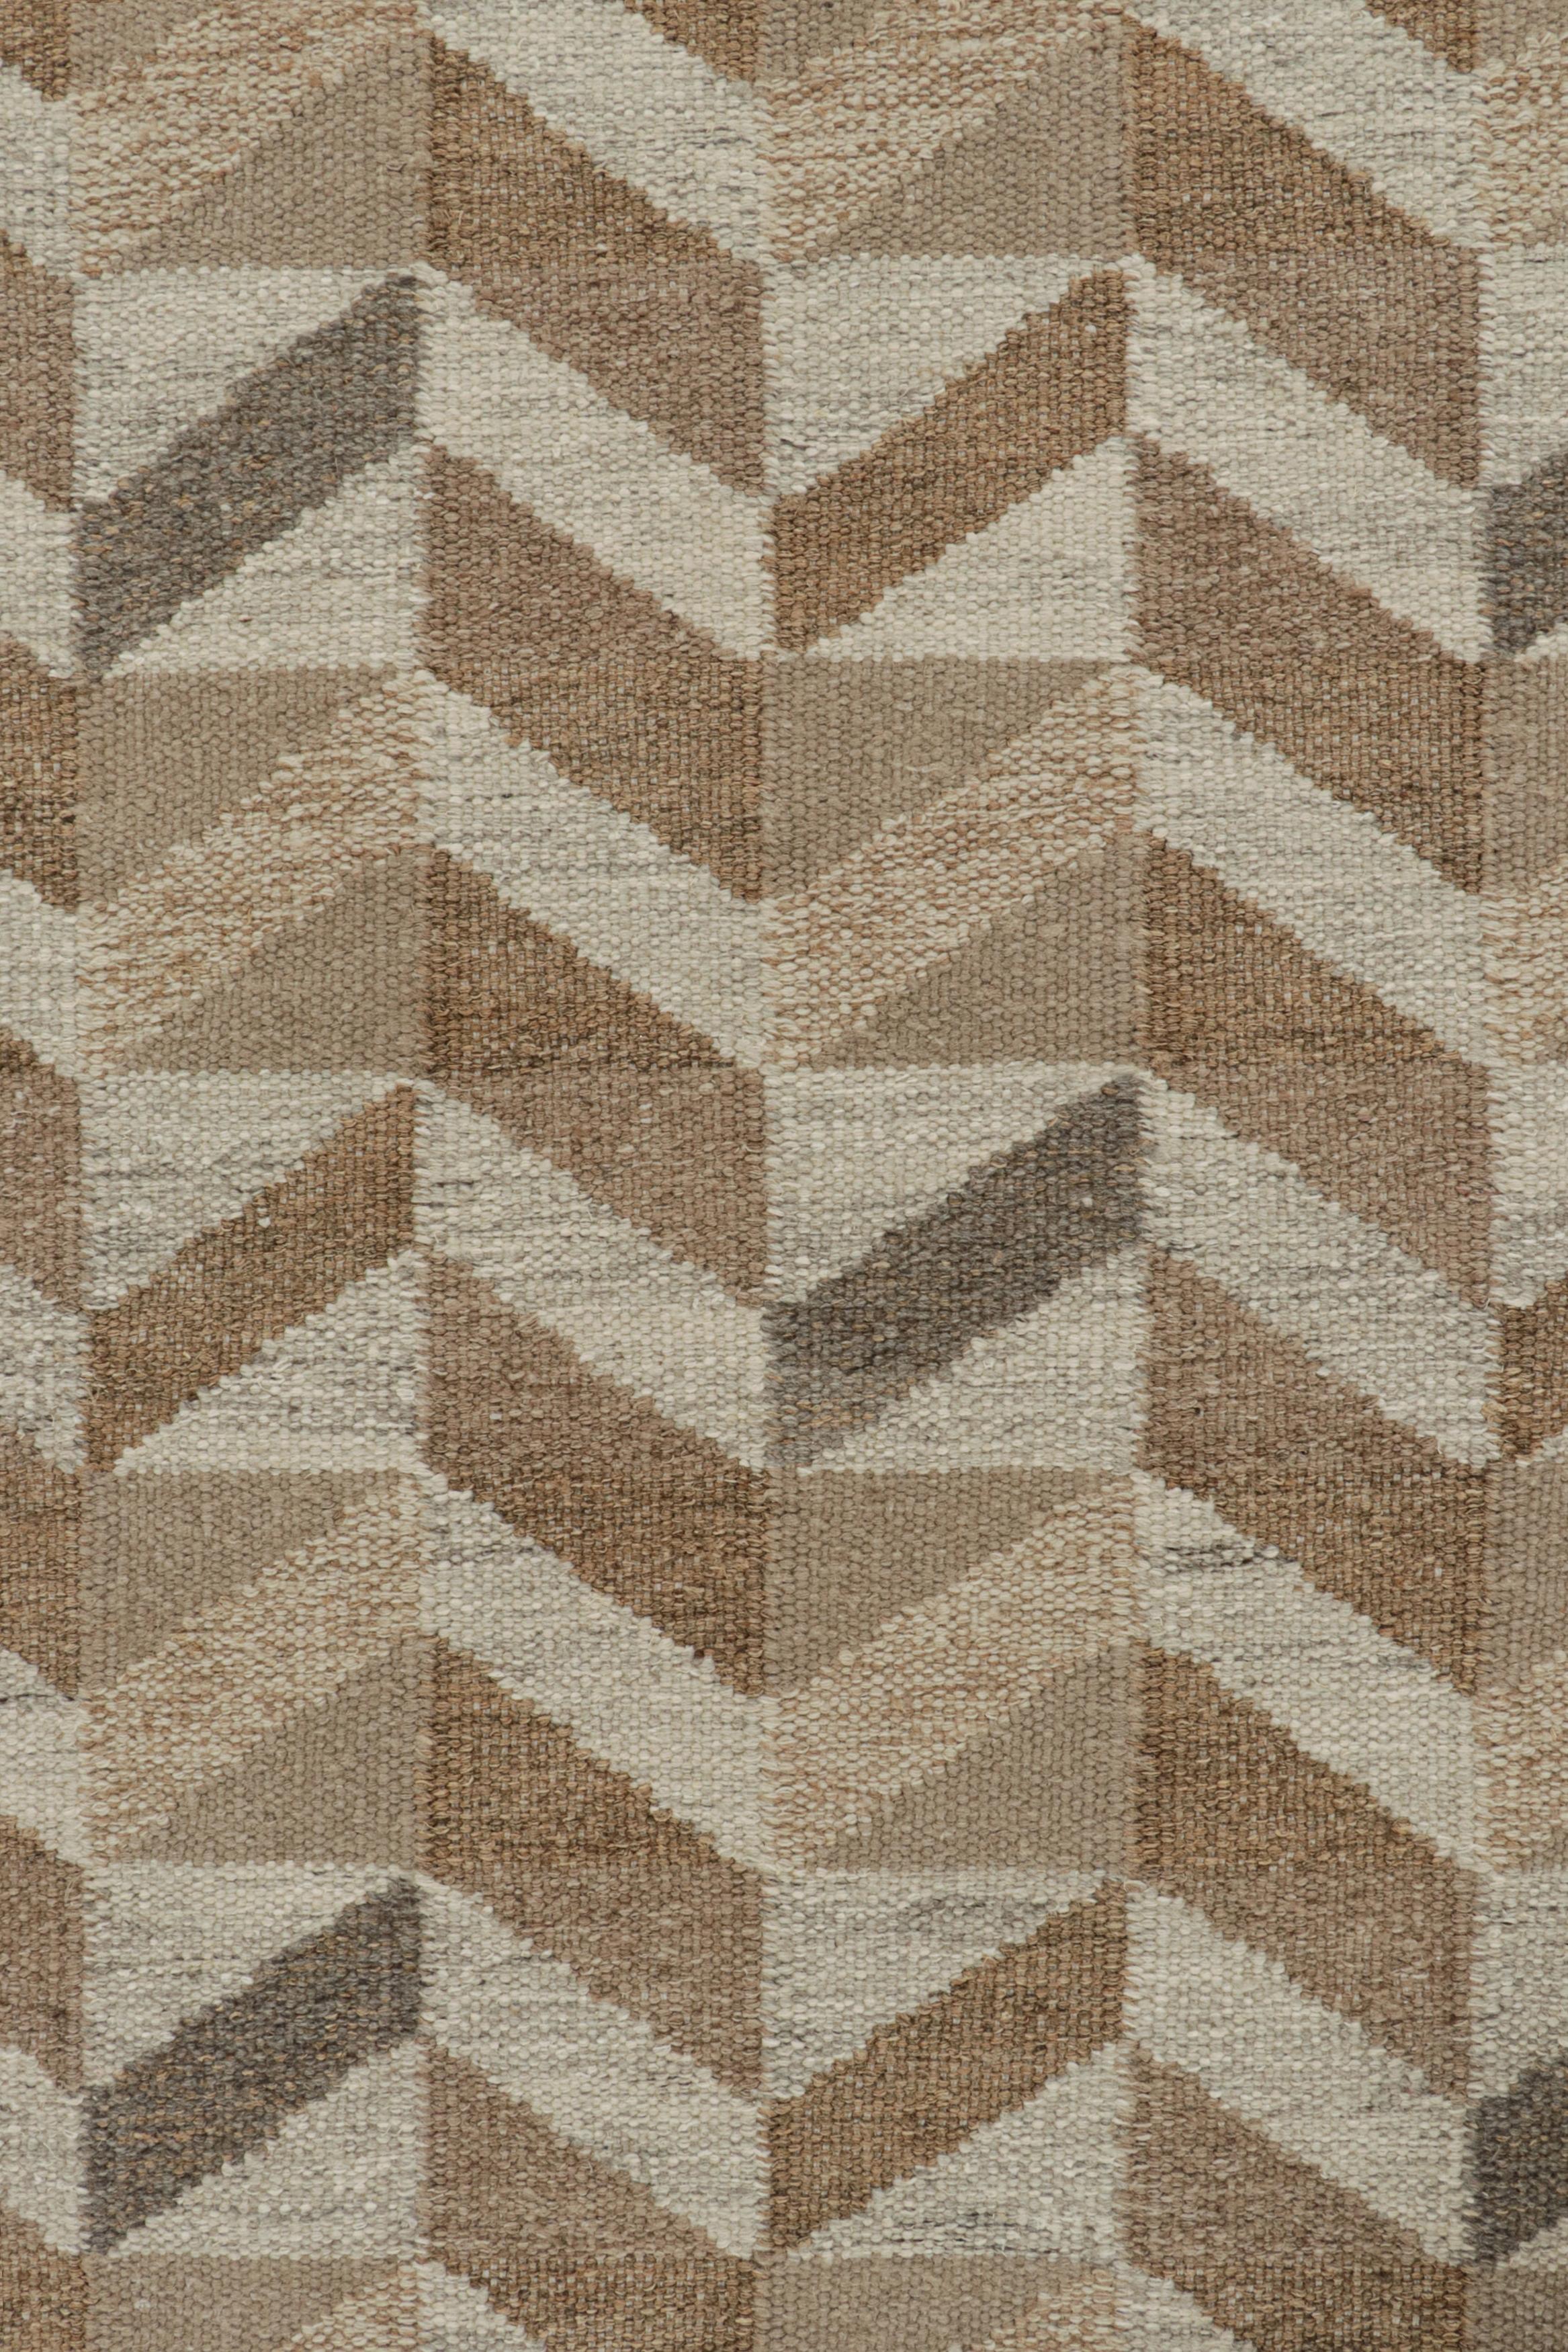 Contemporary Rug & Kilim’s Scandinavian Style Kilim in Gray and Beige-Brown Geometric Pattern For Sale